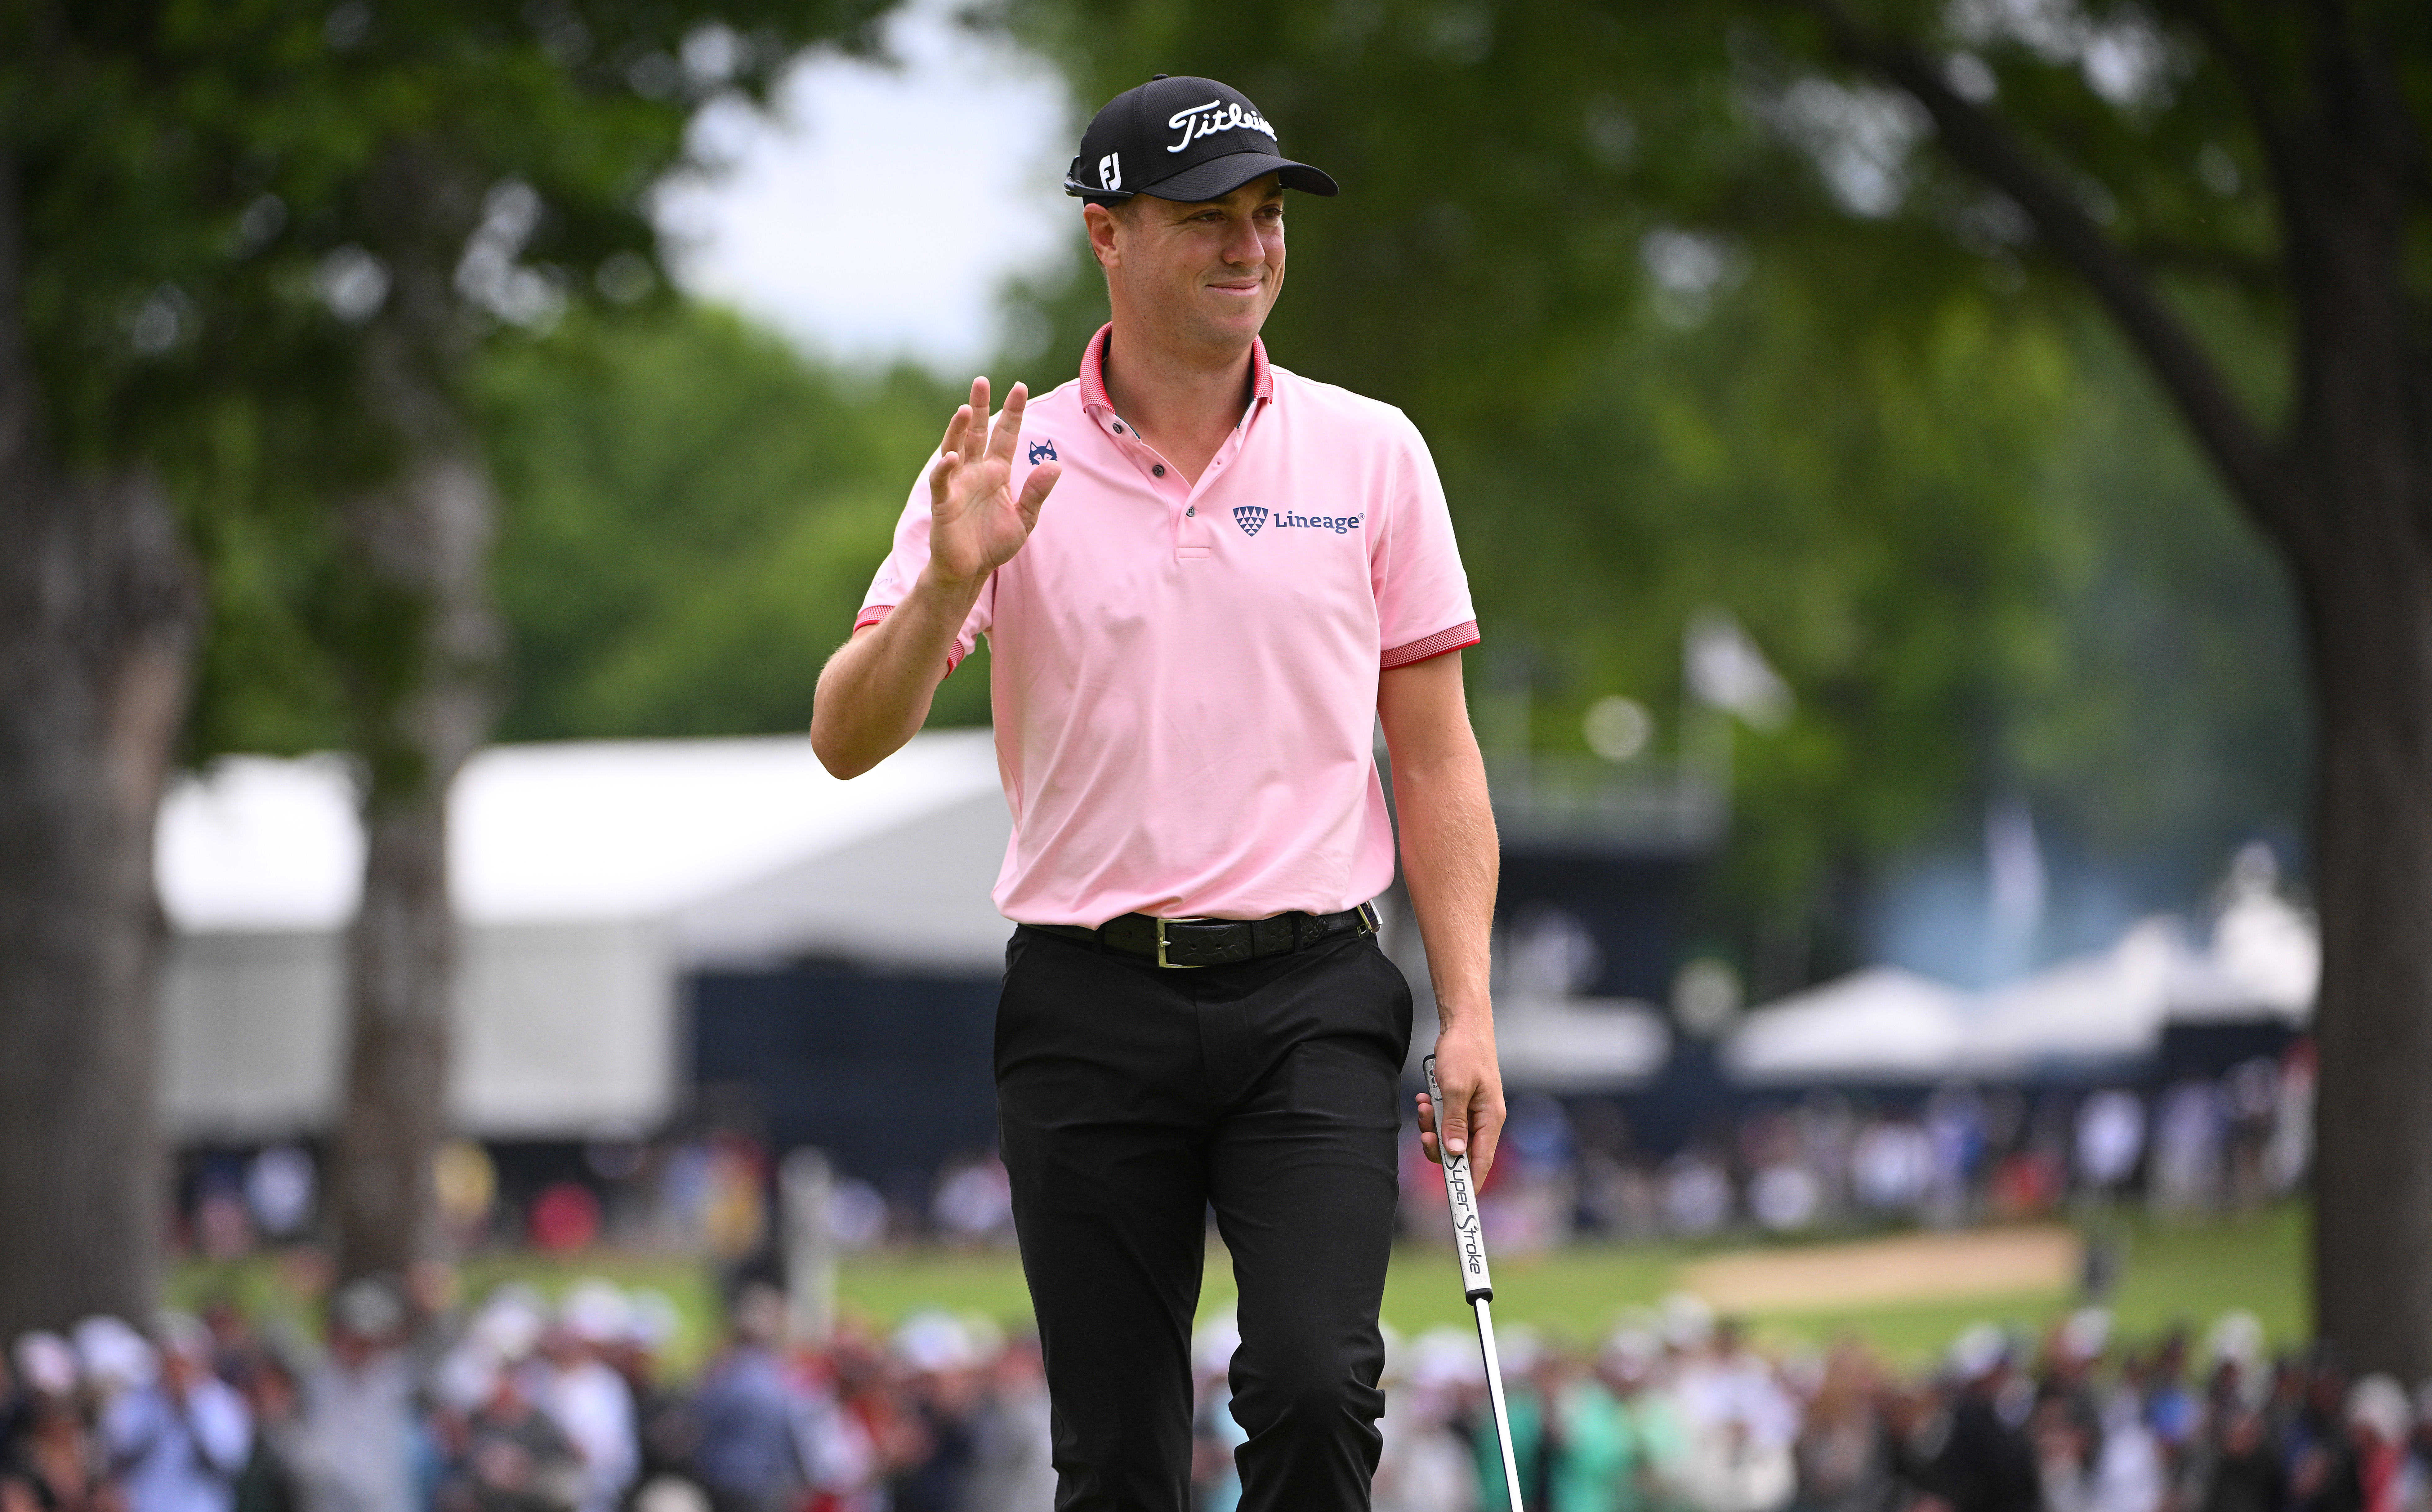 Justin Thomas acknowledges the crowd after making a putt on the sixth green during the final round of the PGA Championship golf tournament at Southern Hills Country Club.